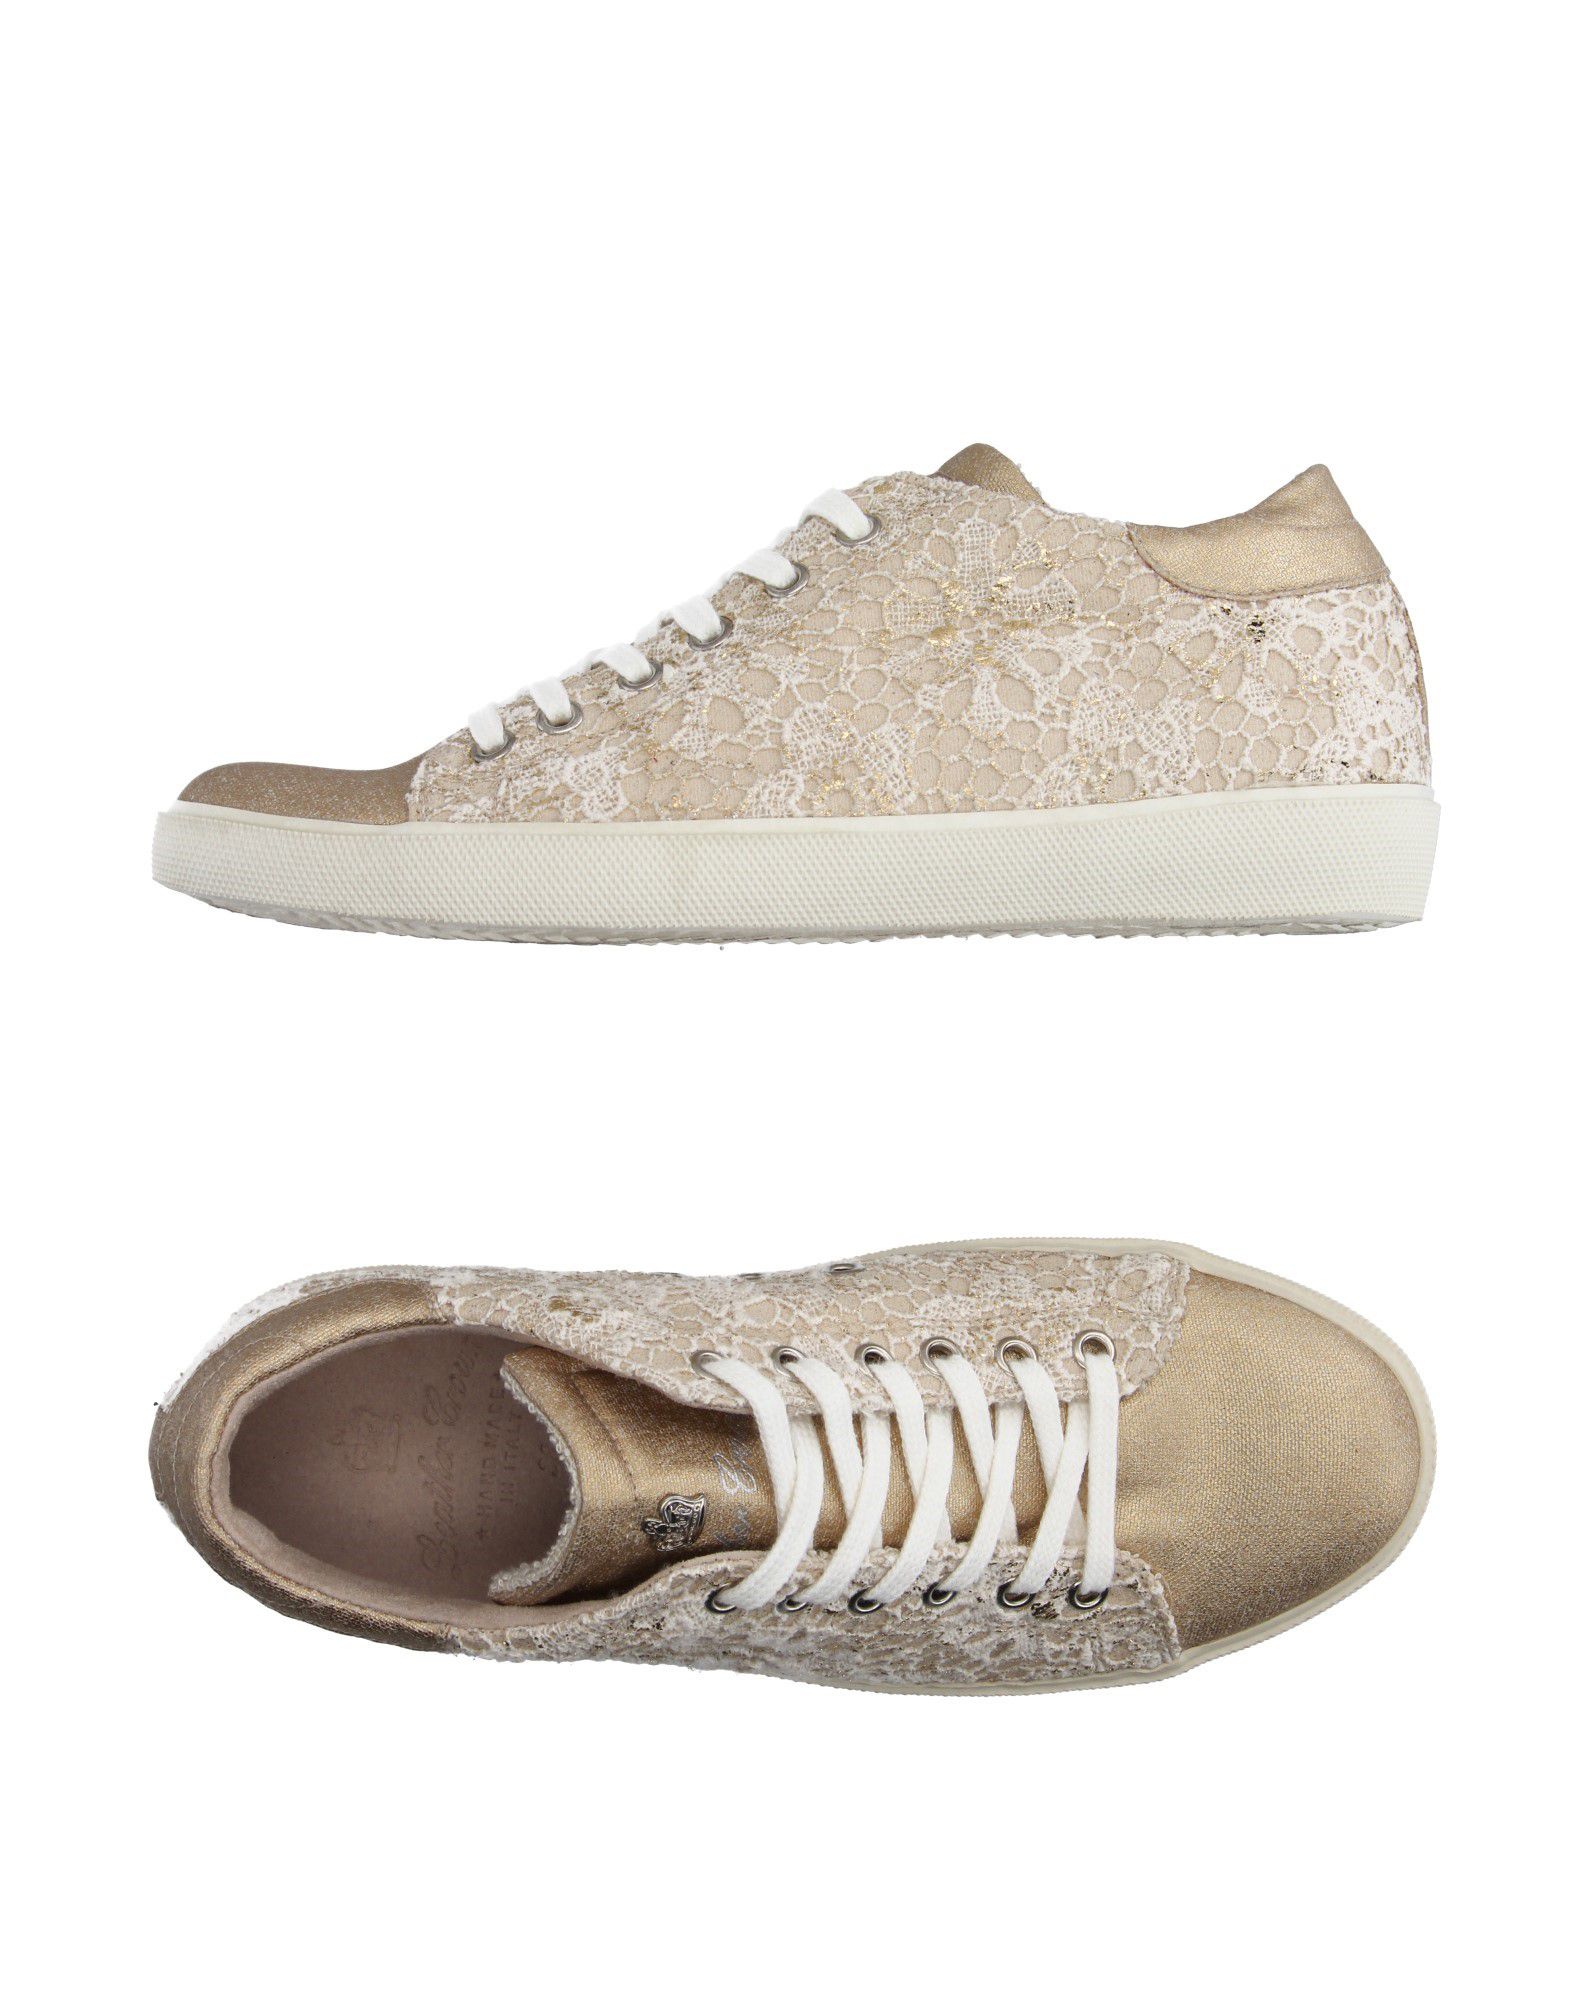 LEATHER CROWN Sneakers,11139196XV 13